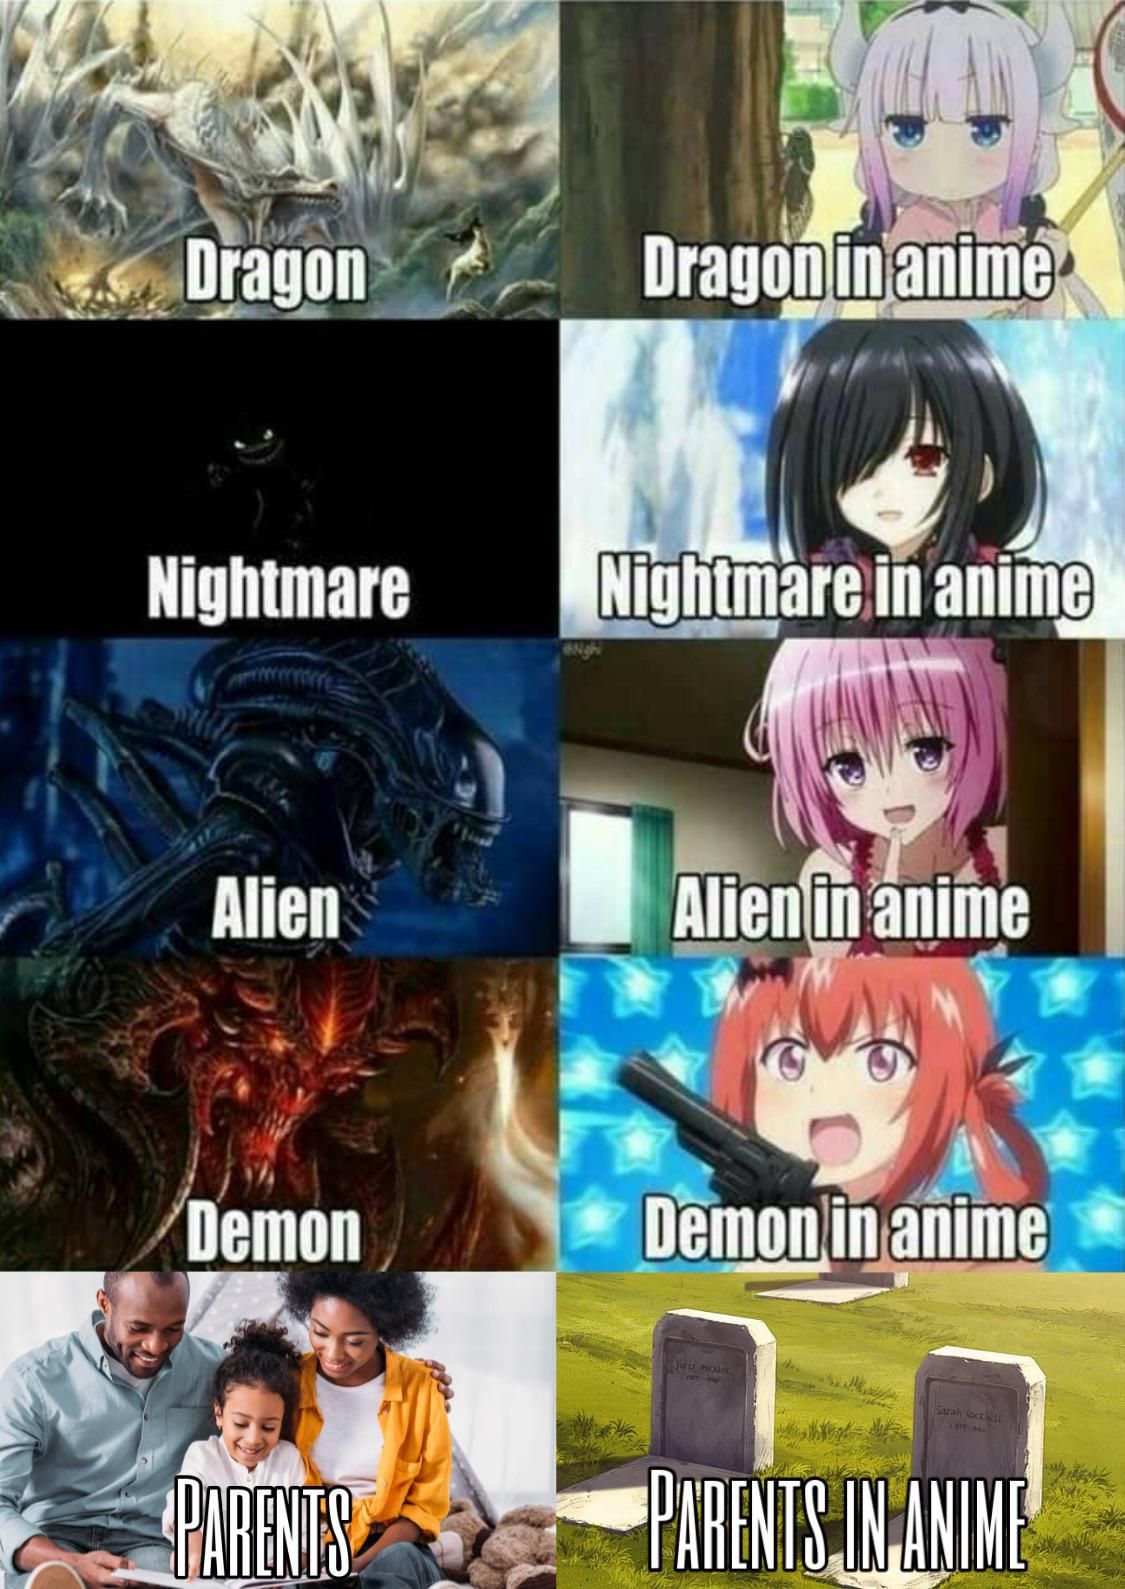 Anime clearly makes everything better